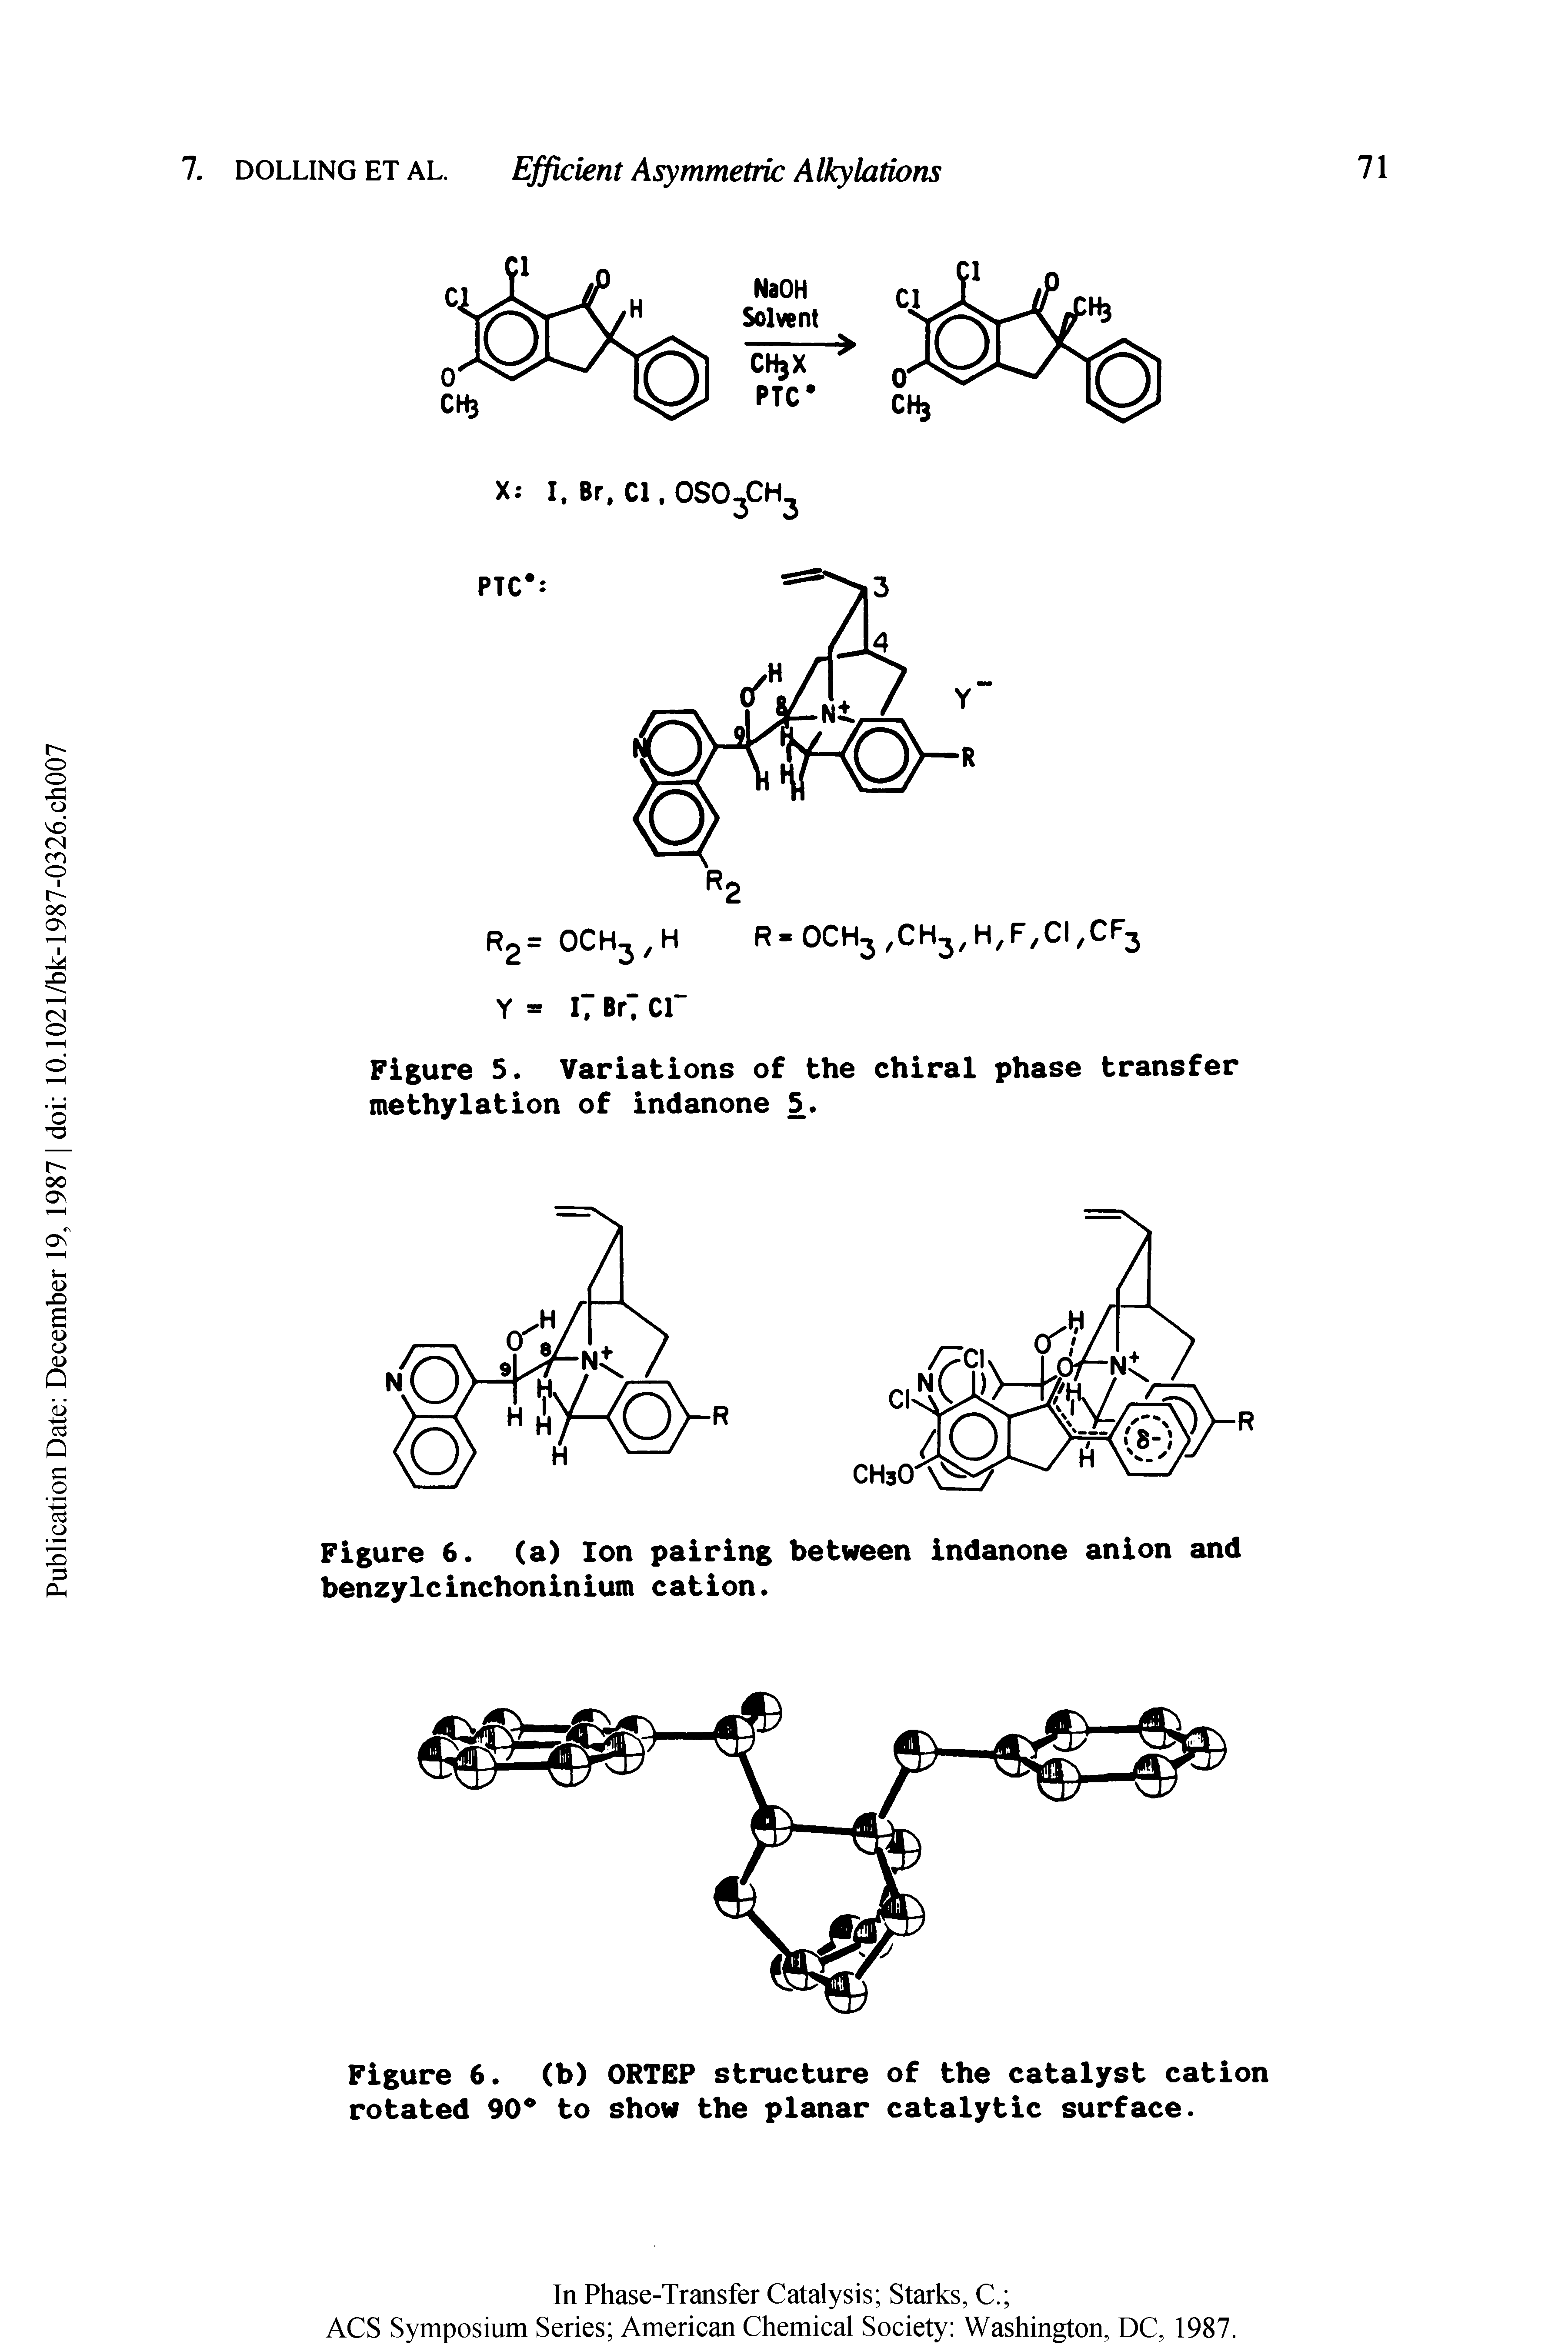 Figure 5. Variations of the chiral phase transfer methylation of indanone 5.